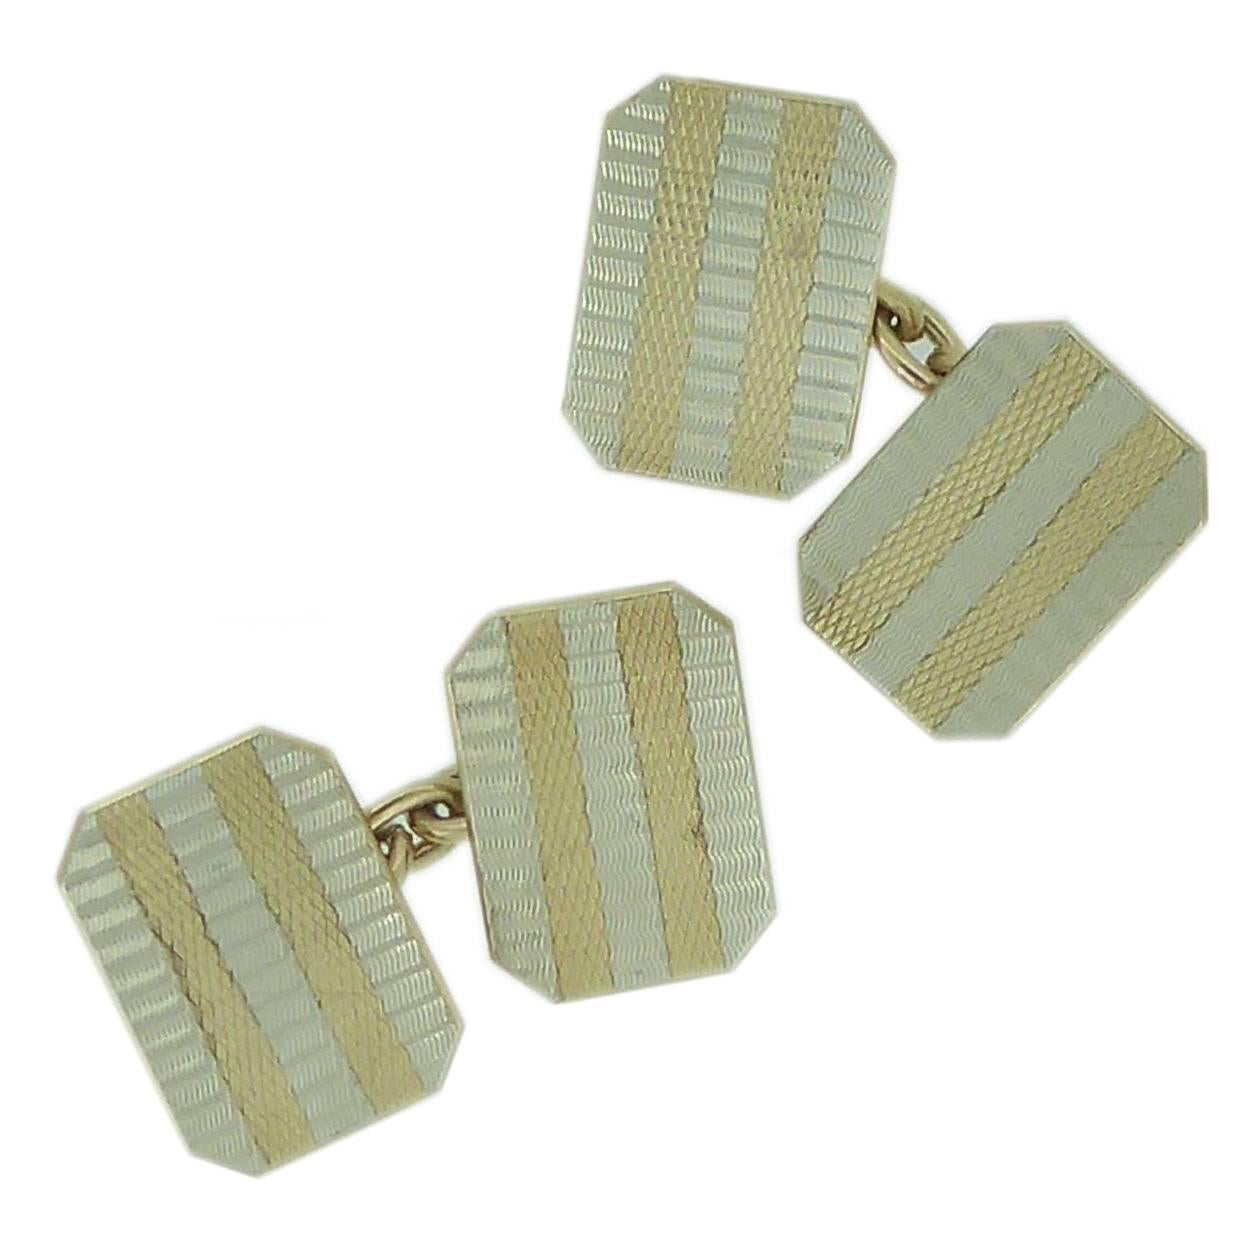 Art Deco Style Cufflinks in Yellow and White Gold, Machine Engraved, circa 1960s